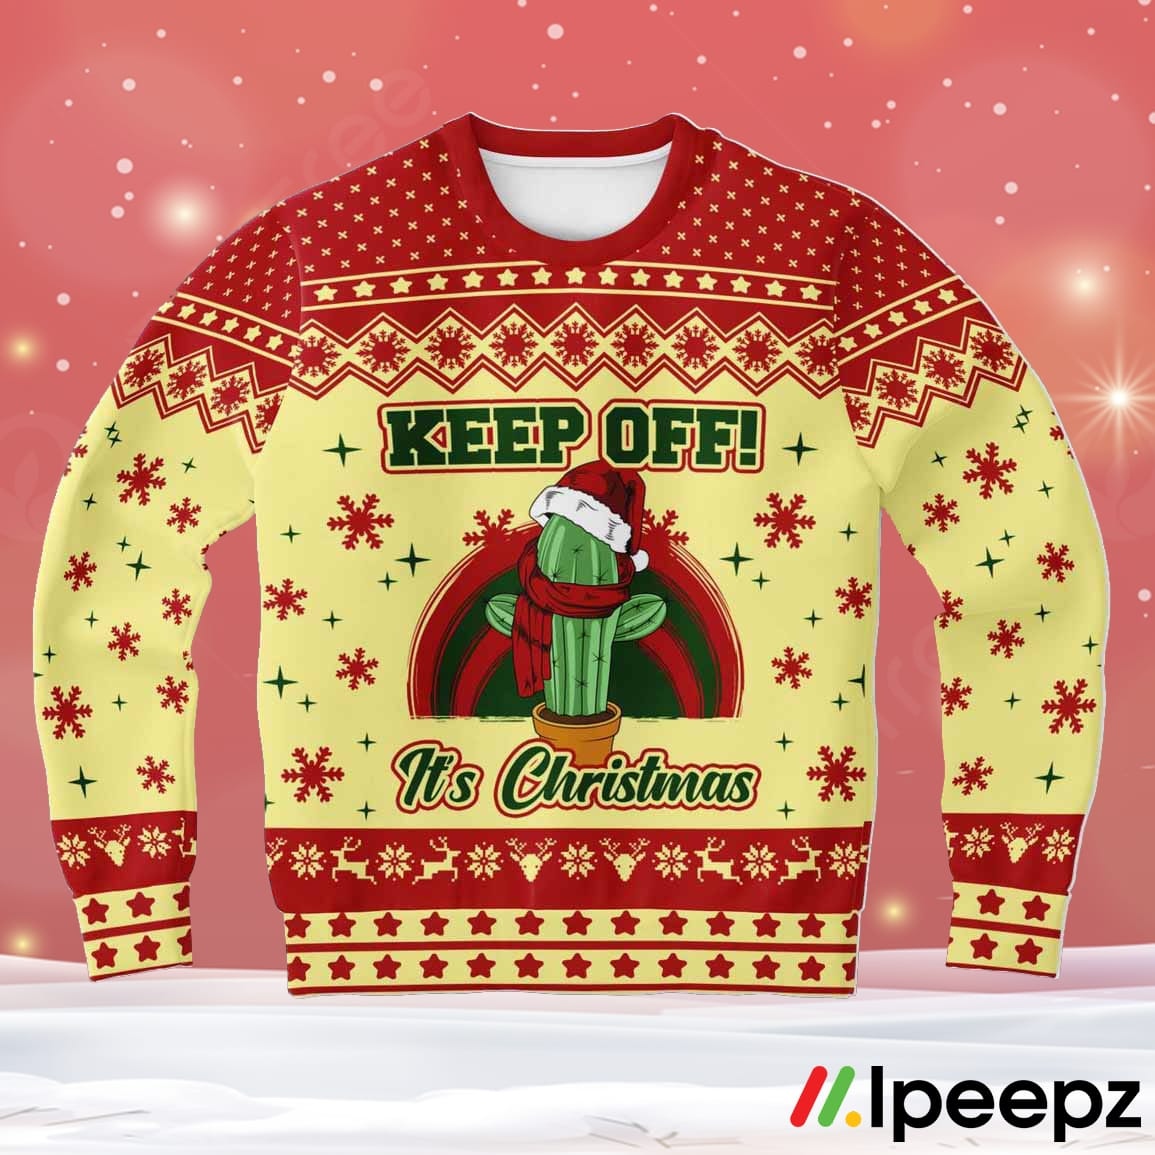 New NHL ugly sweaters are so bad they're good